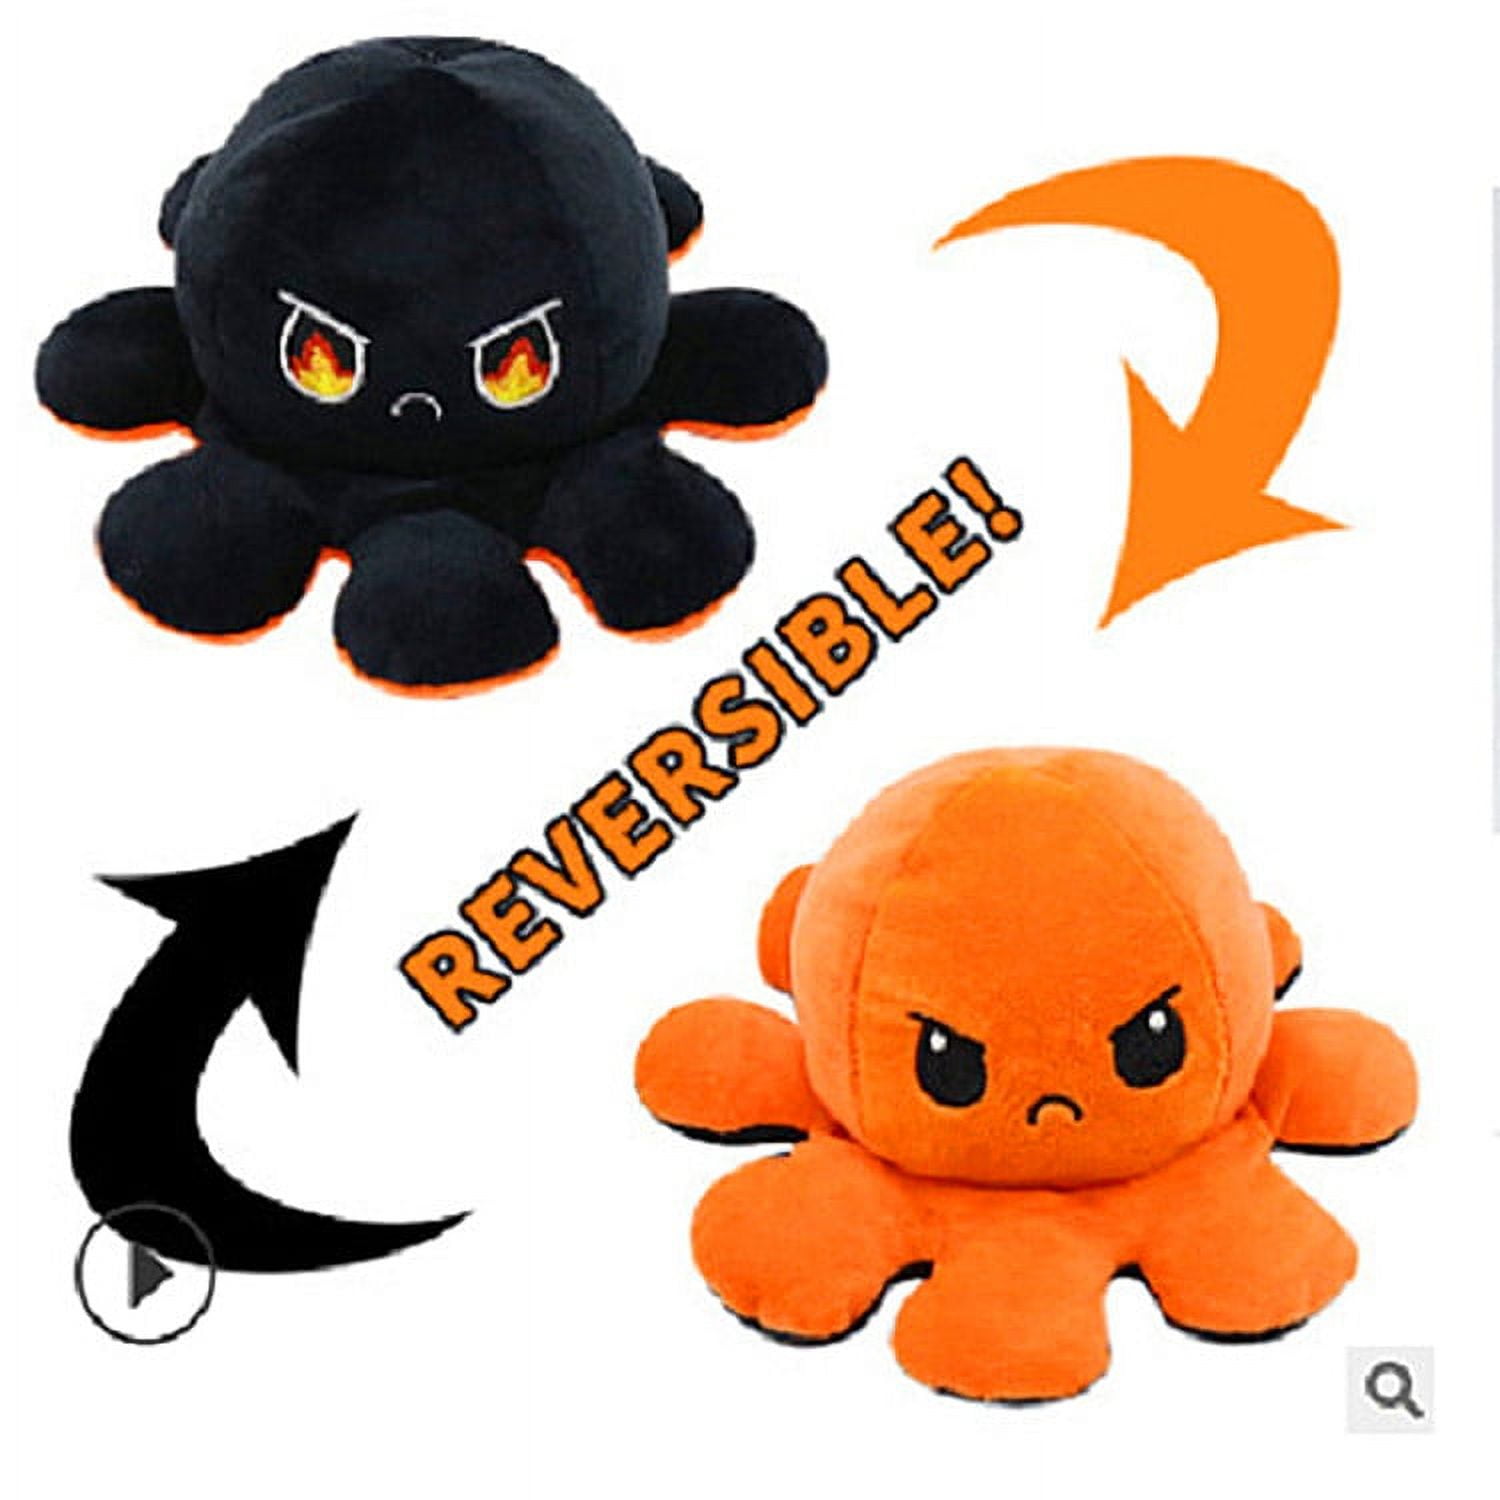 The Reversible Octopus Plush Toy, Double-Sided Flip Plush Reversible Doll,  Mood Octopus Plush，Happy/Angry, Show Your Mood Without A Word 